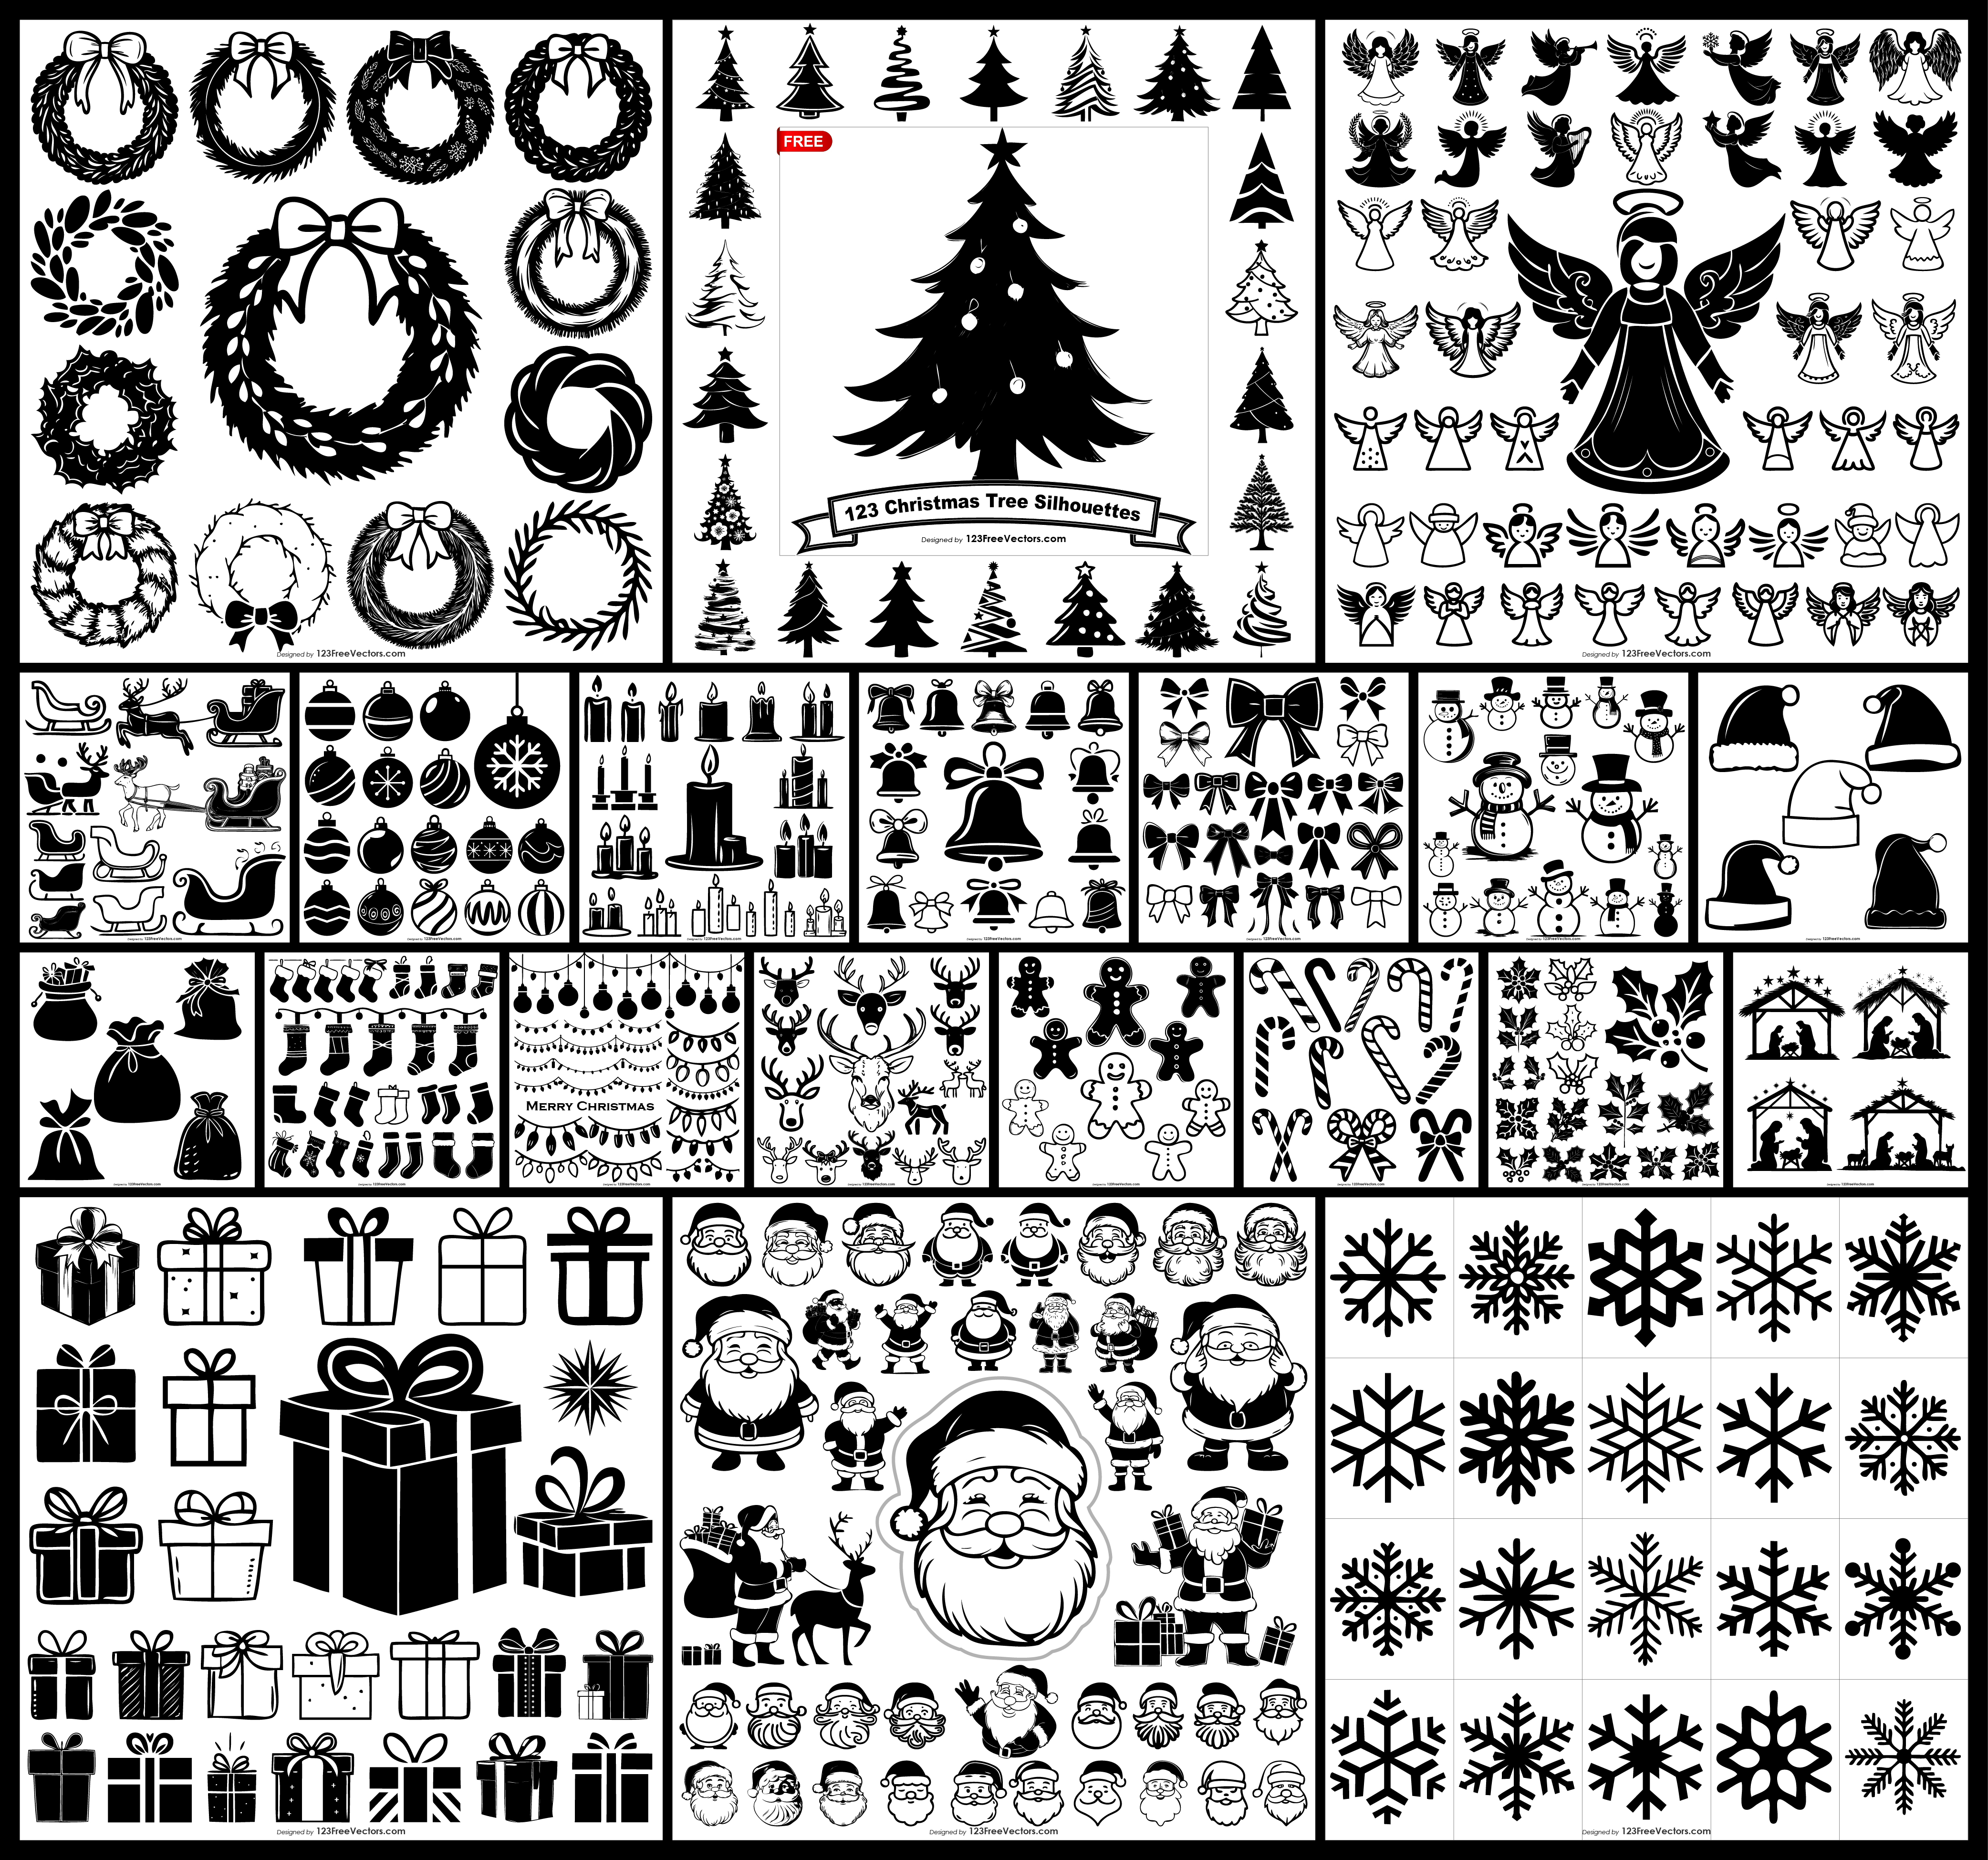 550+ Free Christmas Elements Vector for Festive Decorations